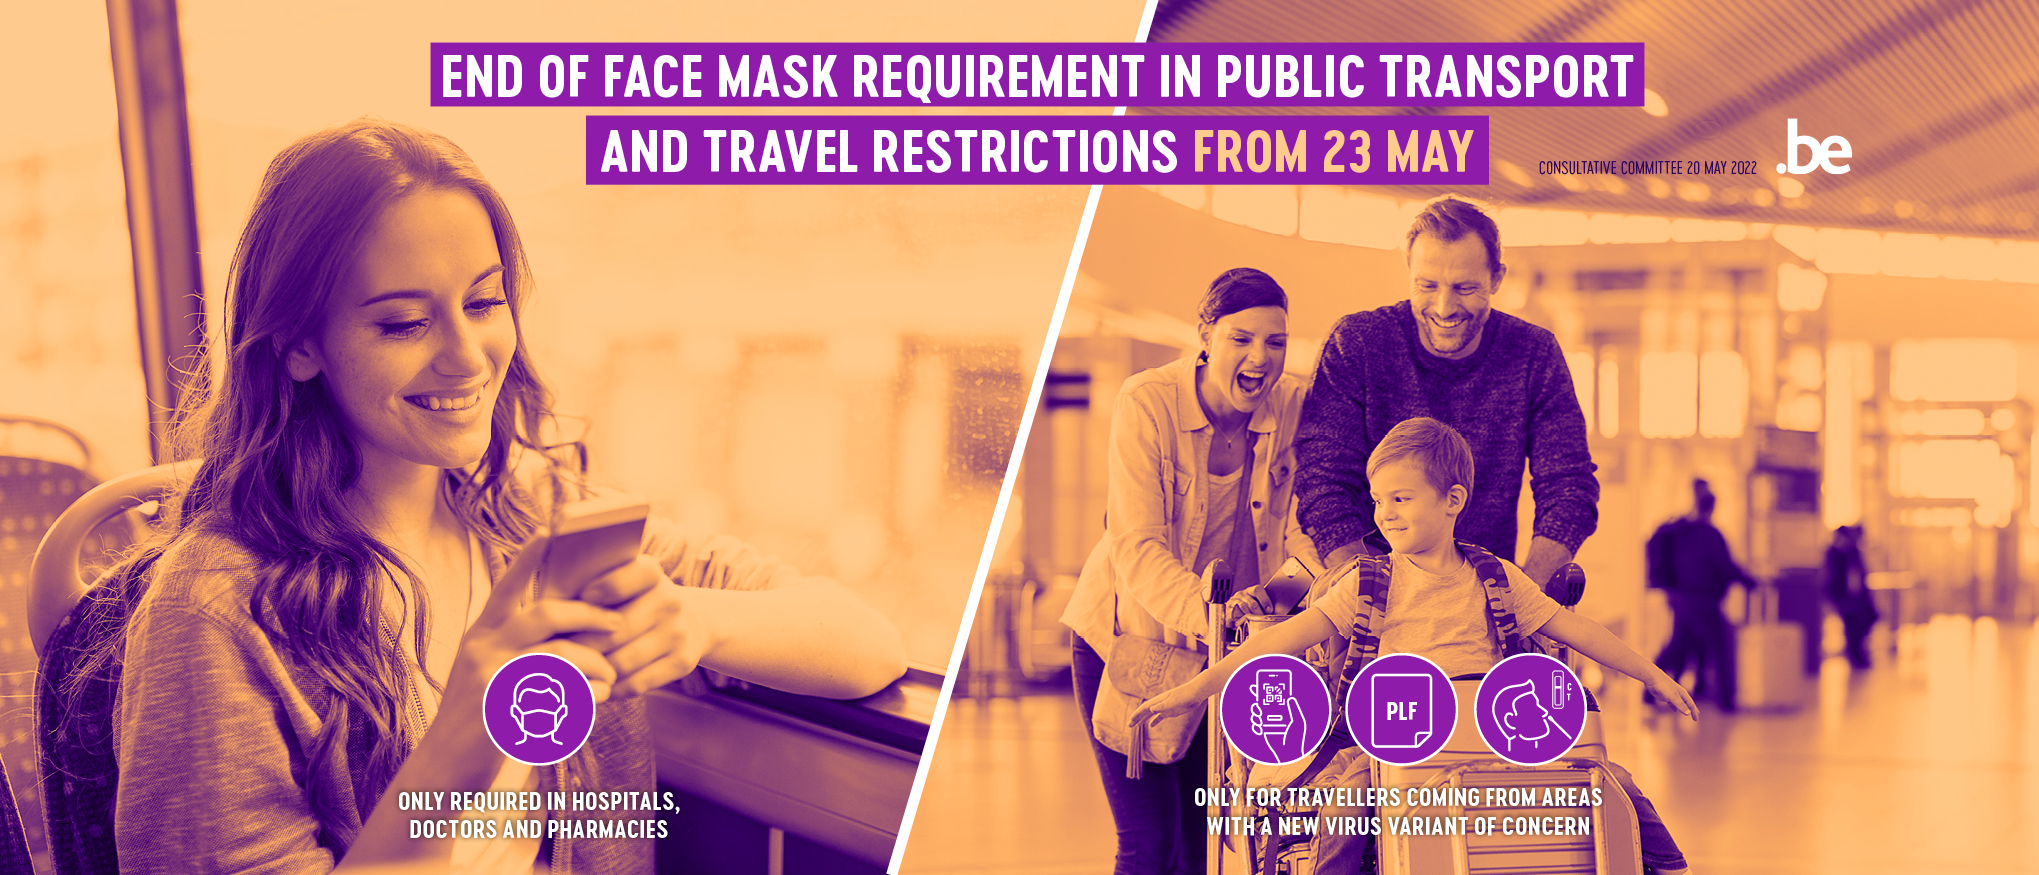 End of face mask requirement in public transport and travel restrictions from 23 may. Face mask only required in hospitals, for doctors and in pharmacies. PLF only required for travellers coming from areas with a new variant of concern.